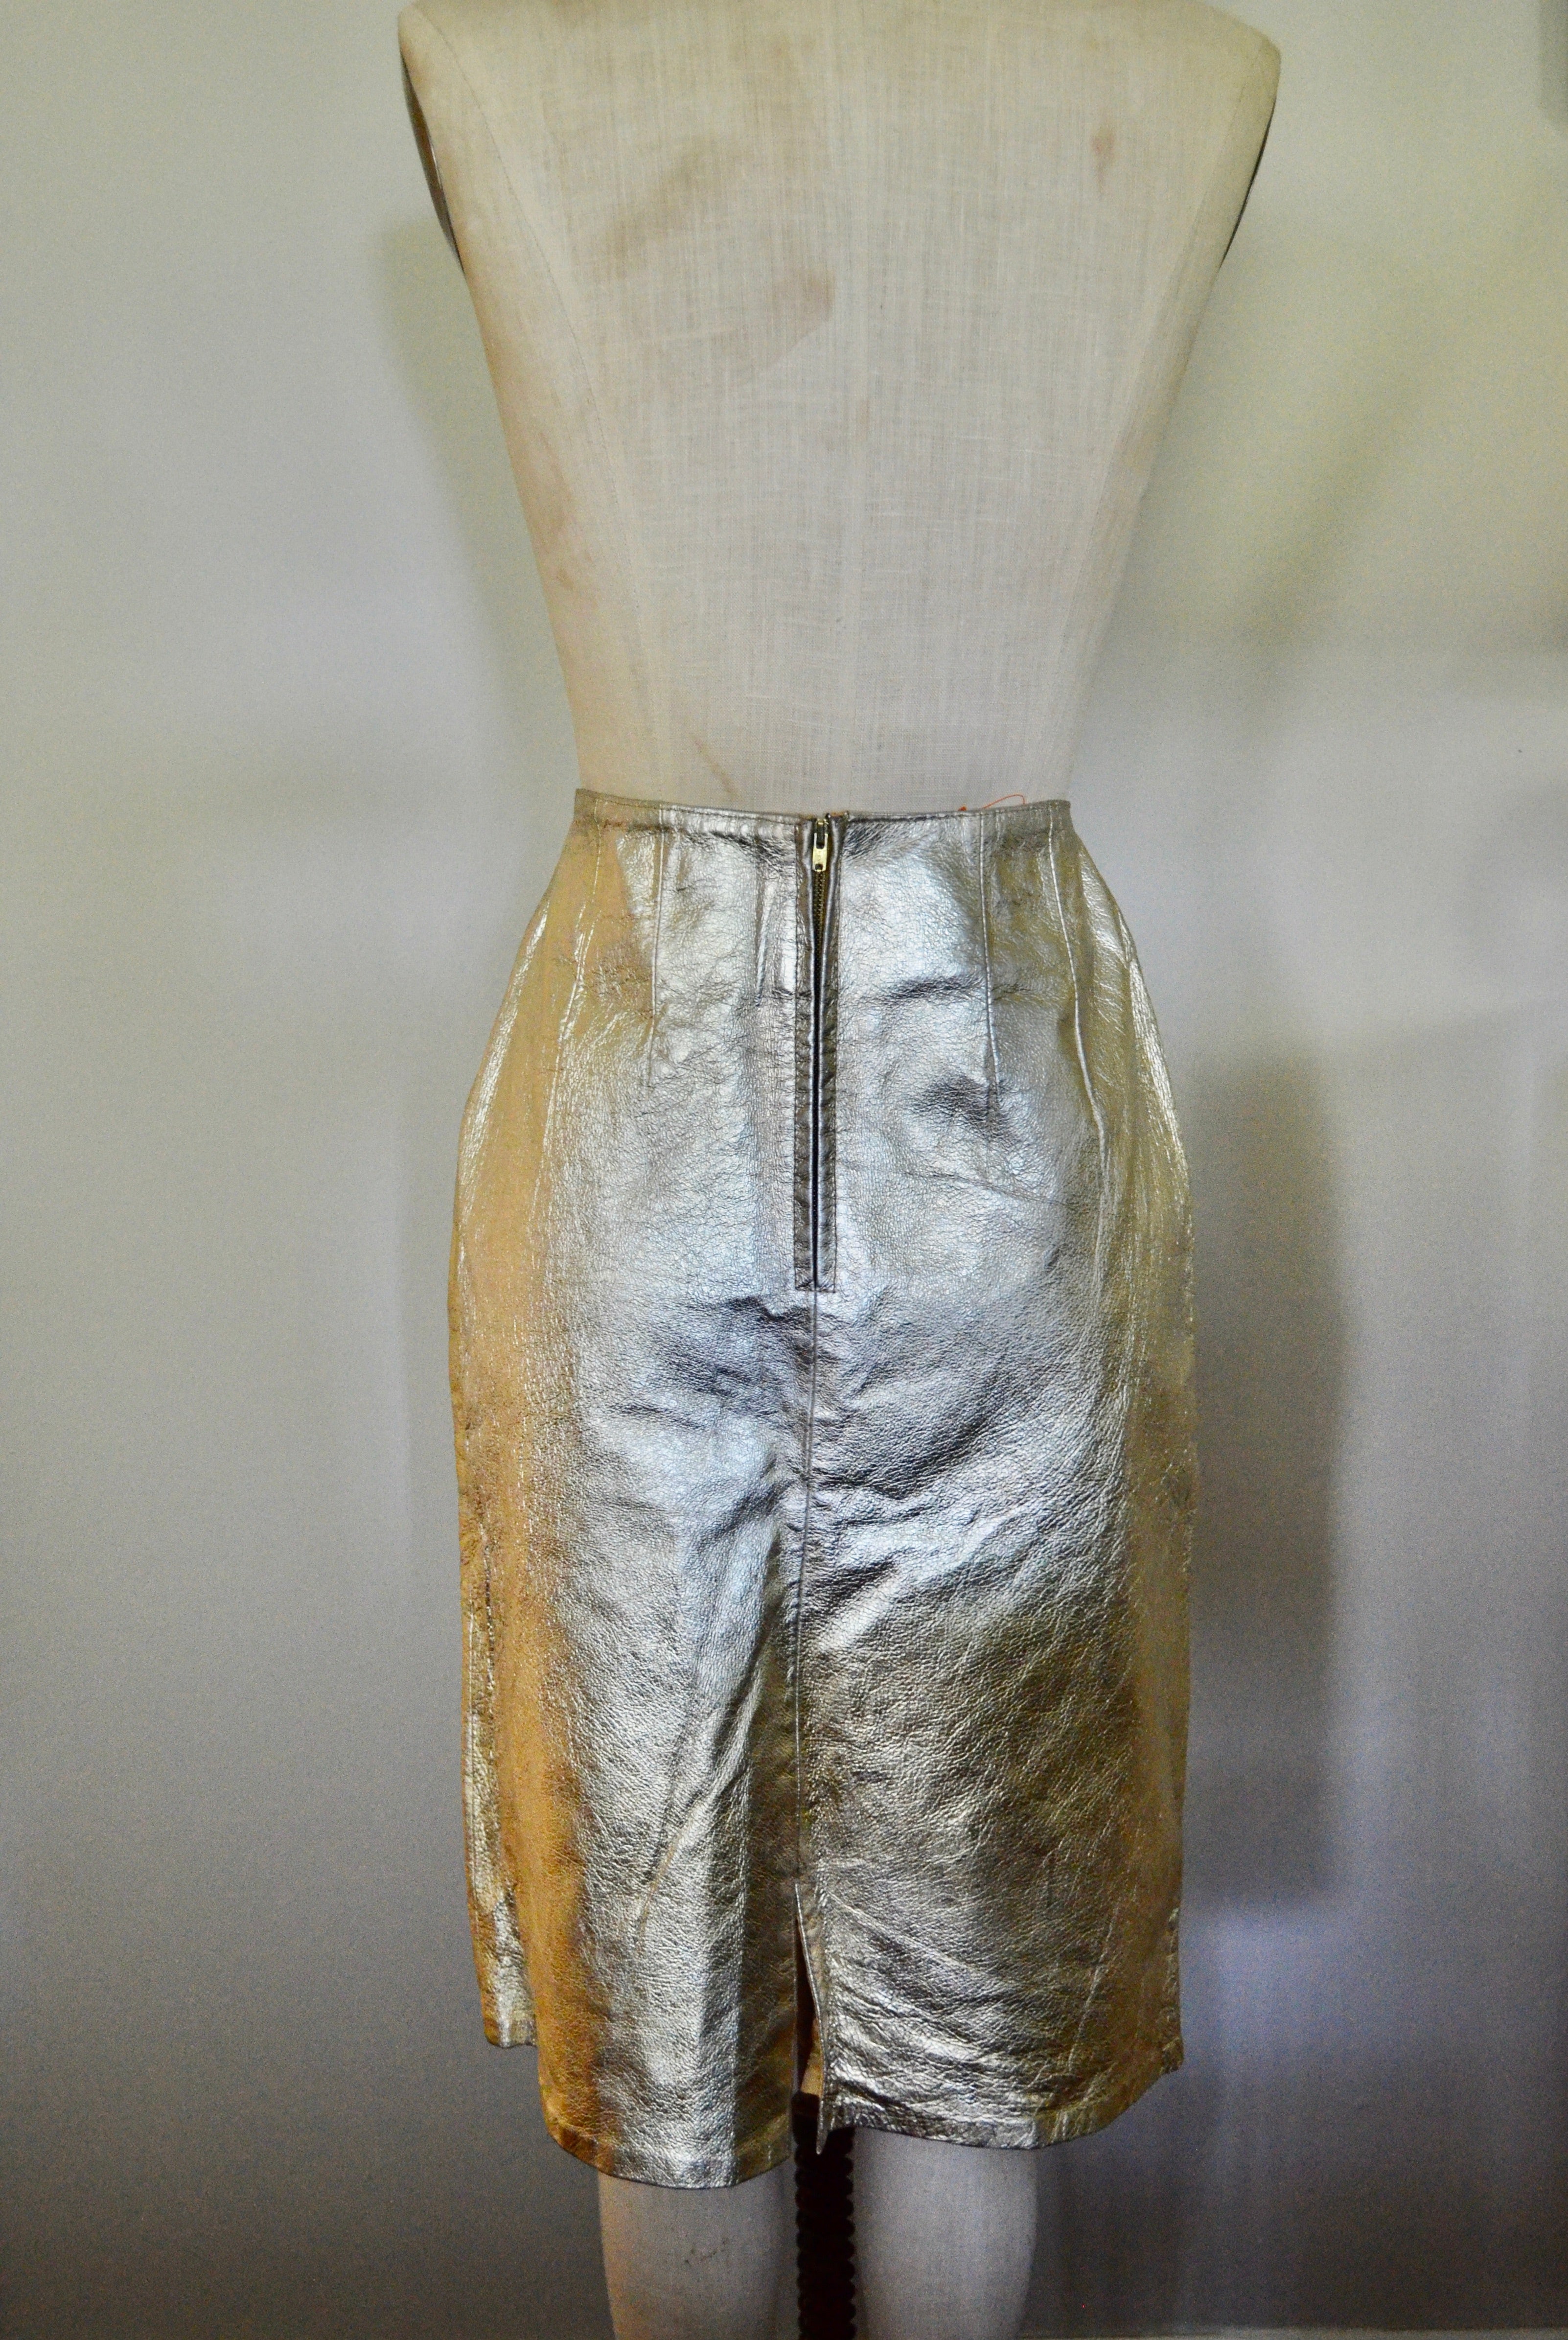 80s NWT Gold Metallic Crackled Leather Pencil Long Skirt Lined Straight Knee Length